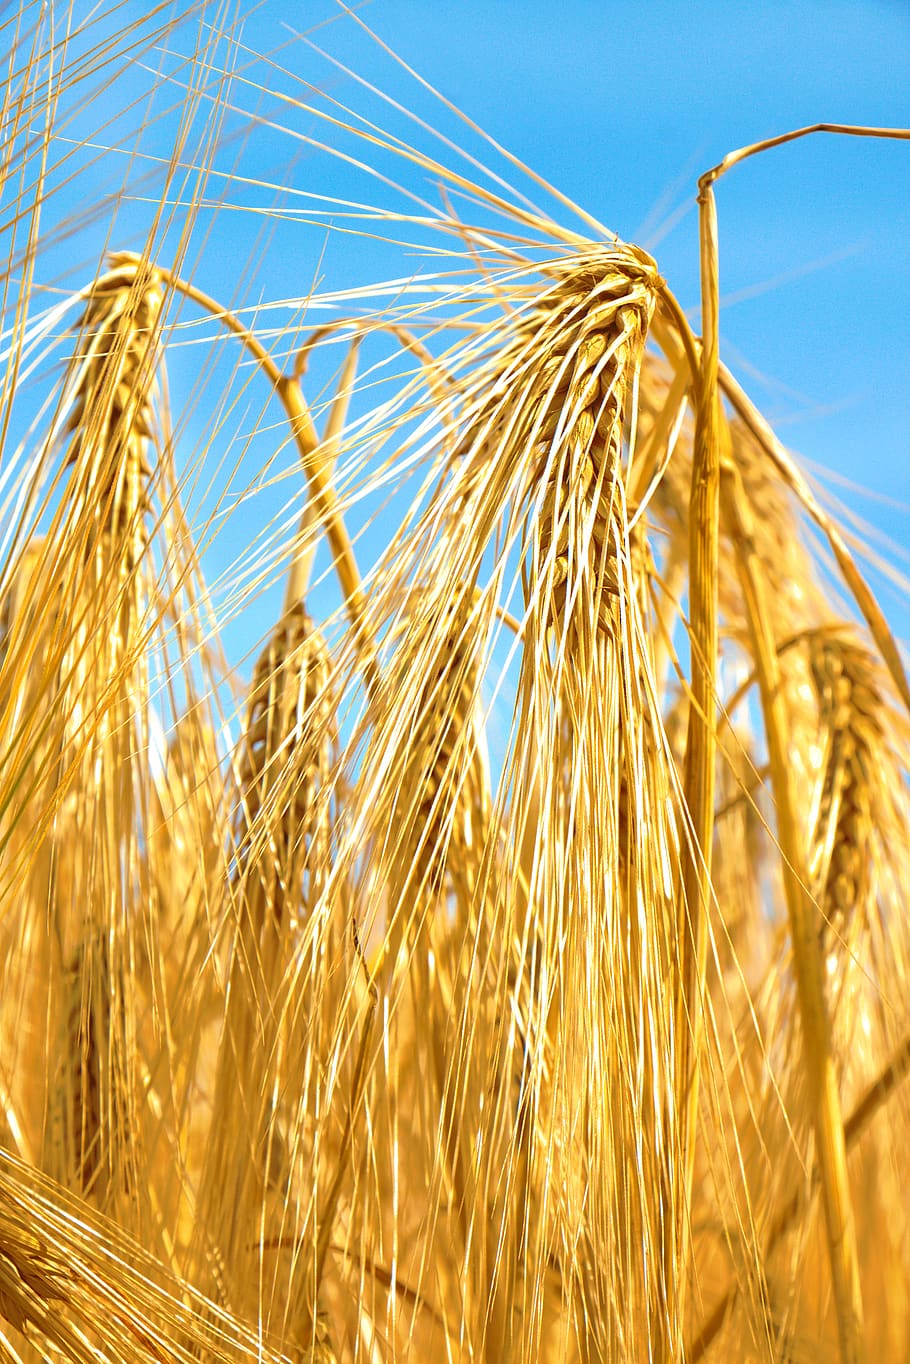 wheat, cornfield, agriculture, cereals, epi, detail, crop, cereal plant, plant, growth